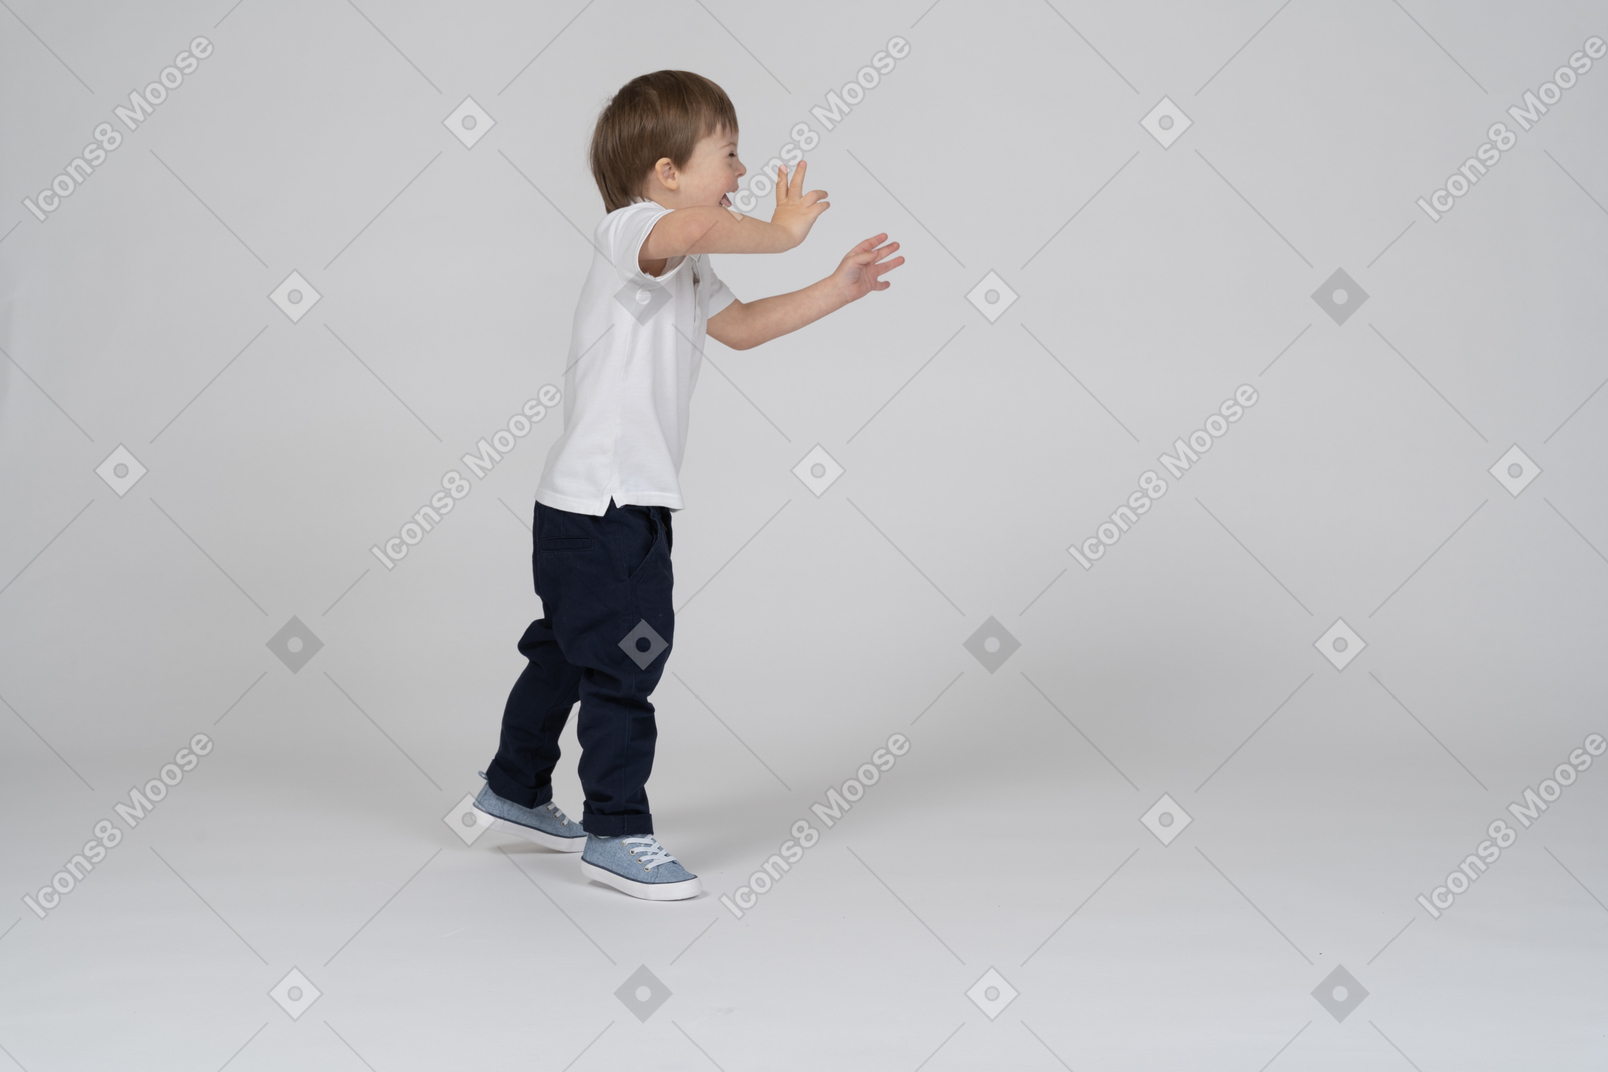 A boy standing in front of an empty wall